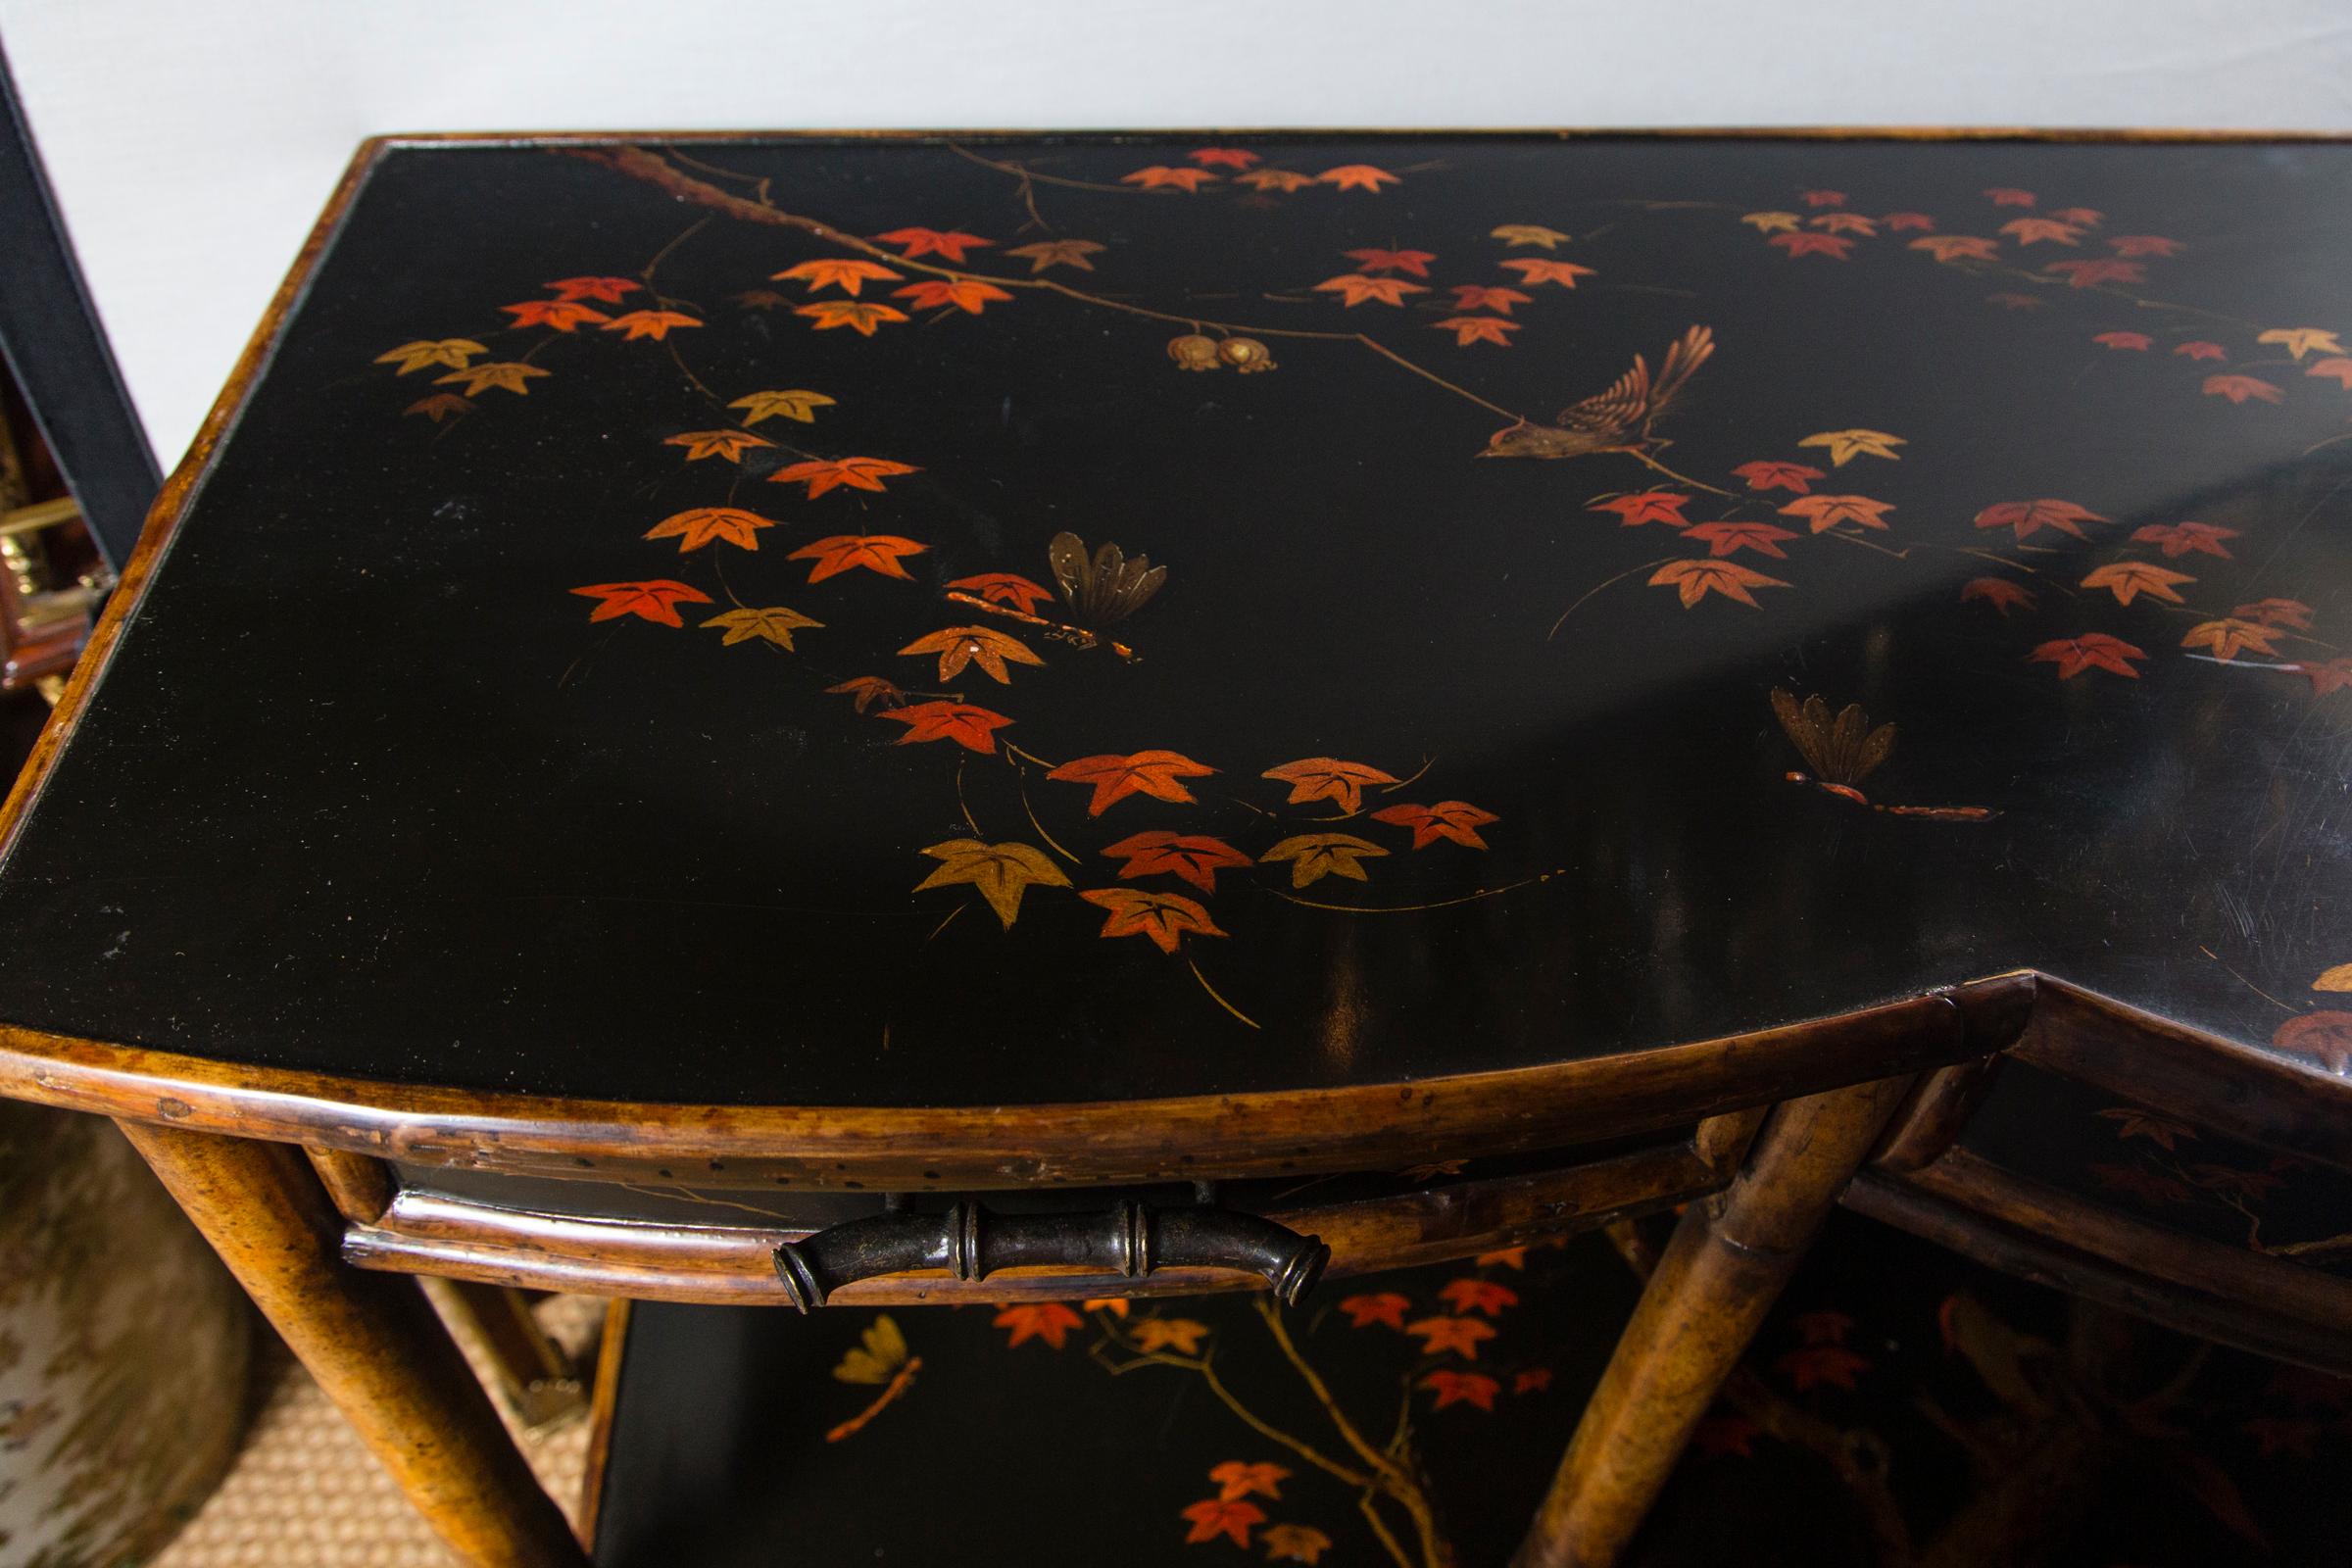 Black lacquer designed in the Asian Style with birds, flowers, leaves and vines.
Three drawers below the top tier. Mirrored back.
It could be used for books, or displays of collections.
Bearing a brass plate 